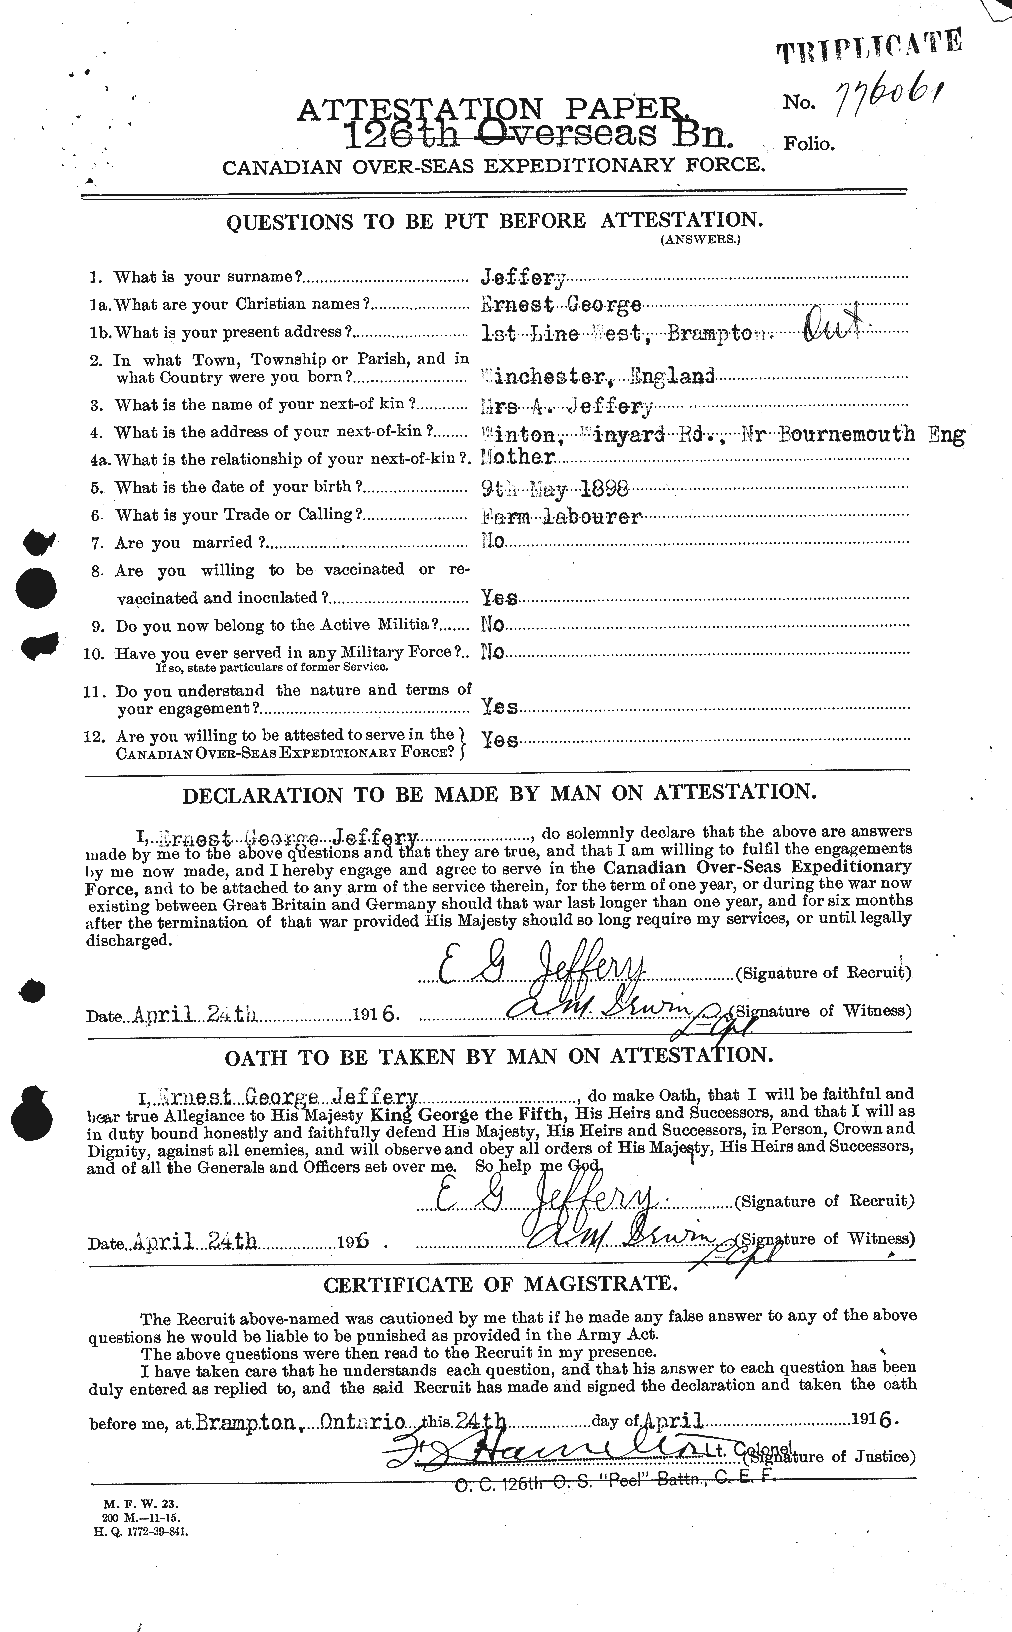 Personnel Records of the First World War - CEF 417740a